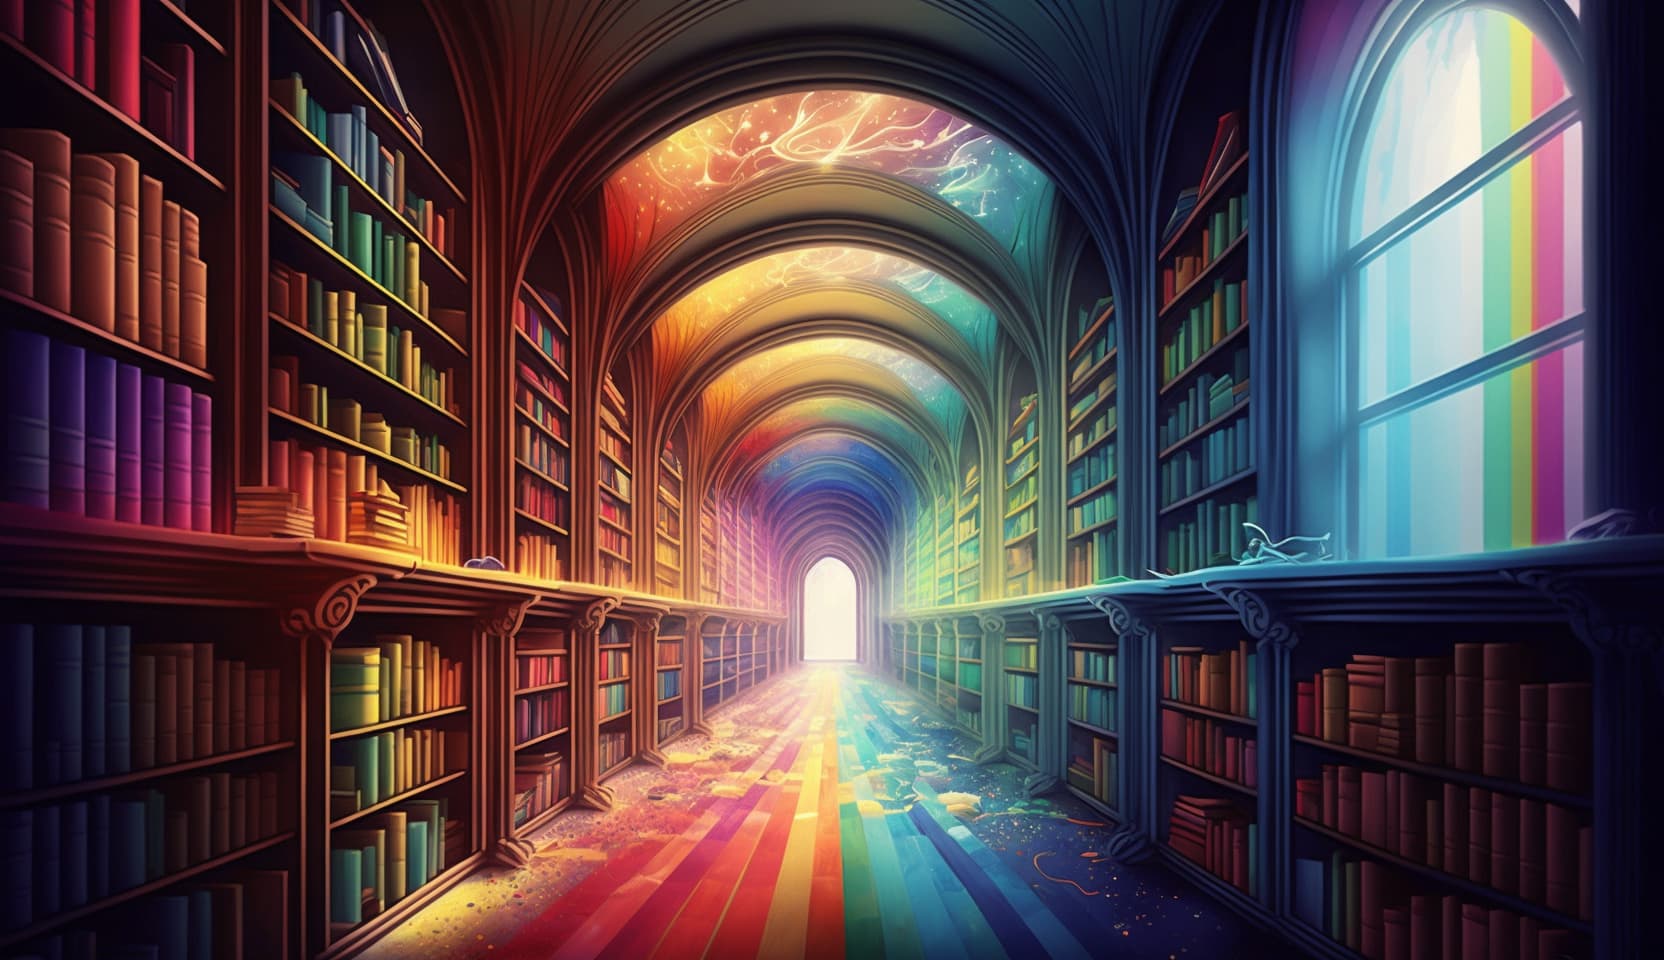 The grand library of dreams